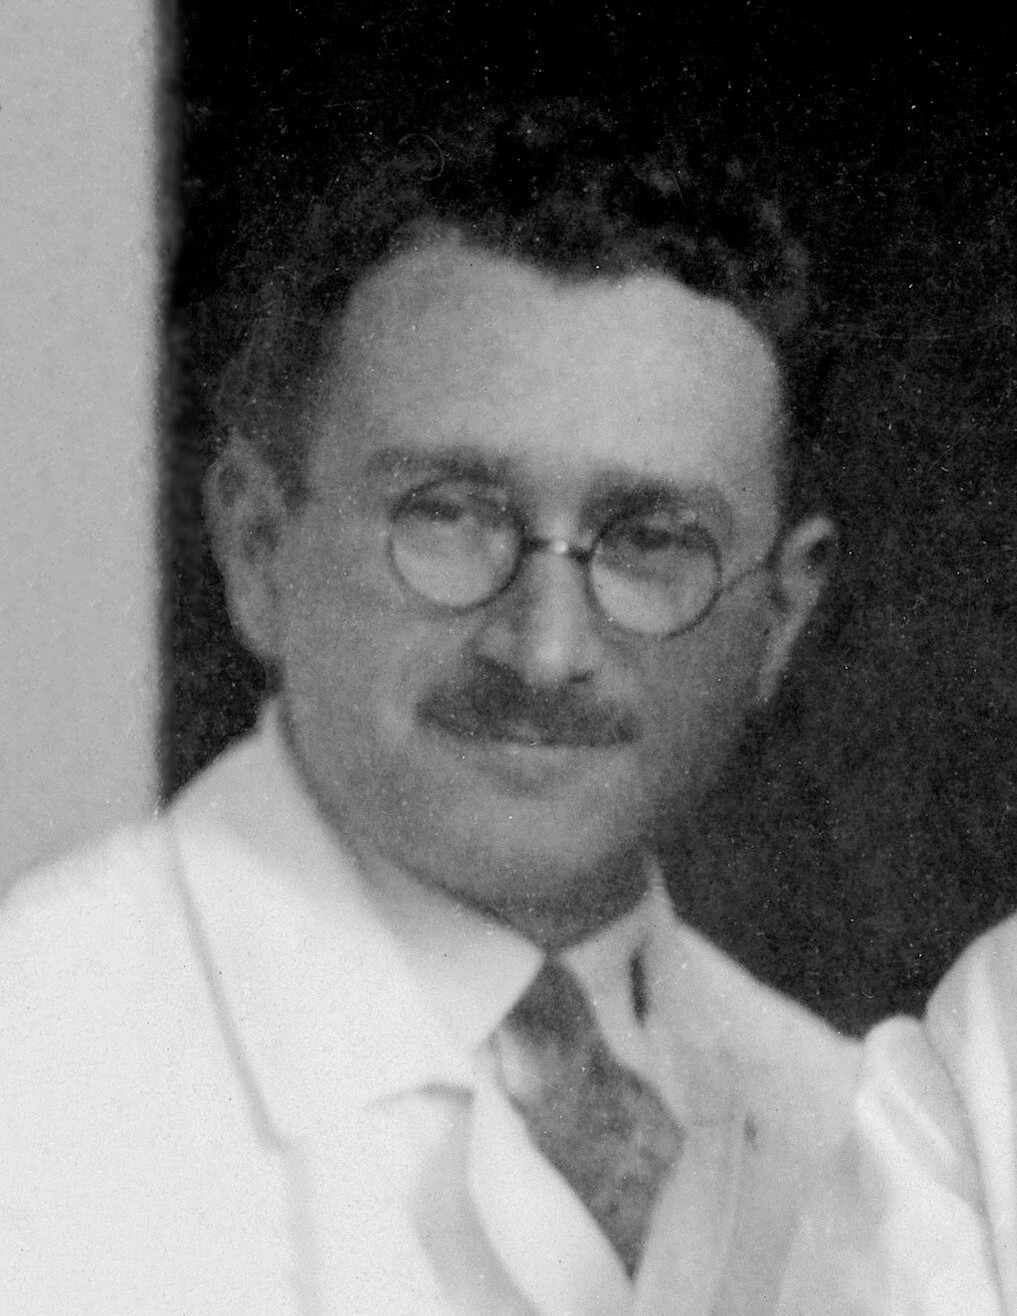 Ludwig Guttmann Biography - German-British Neurologist Known for Founding the Paralympic Games